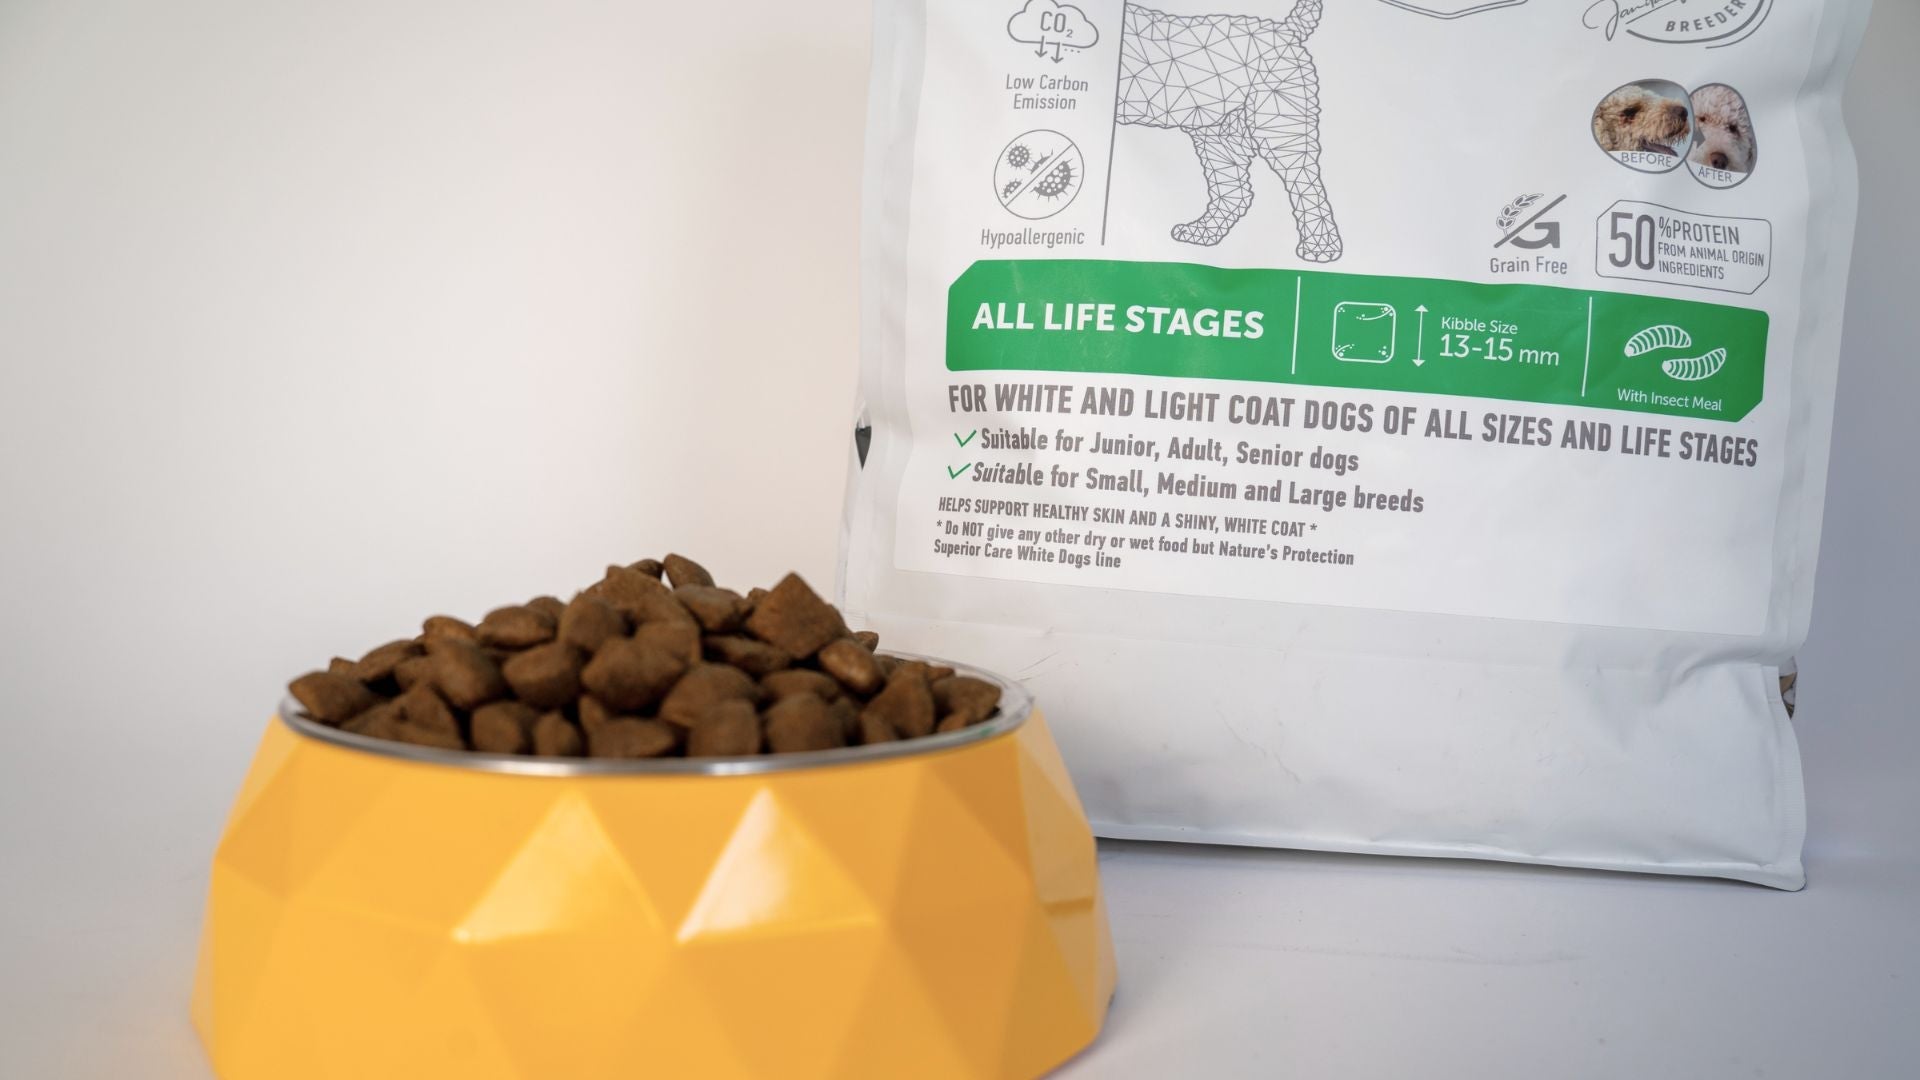 Innovation in Pet Food Market: All Life Stages Dog Food